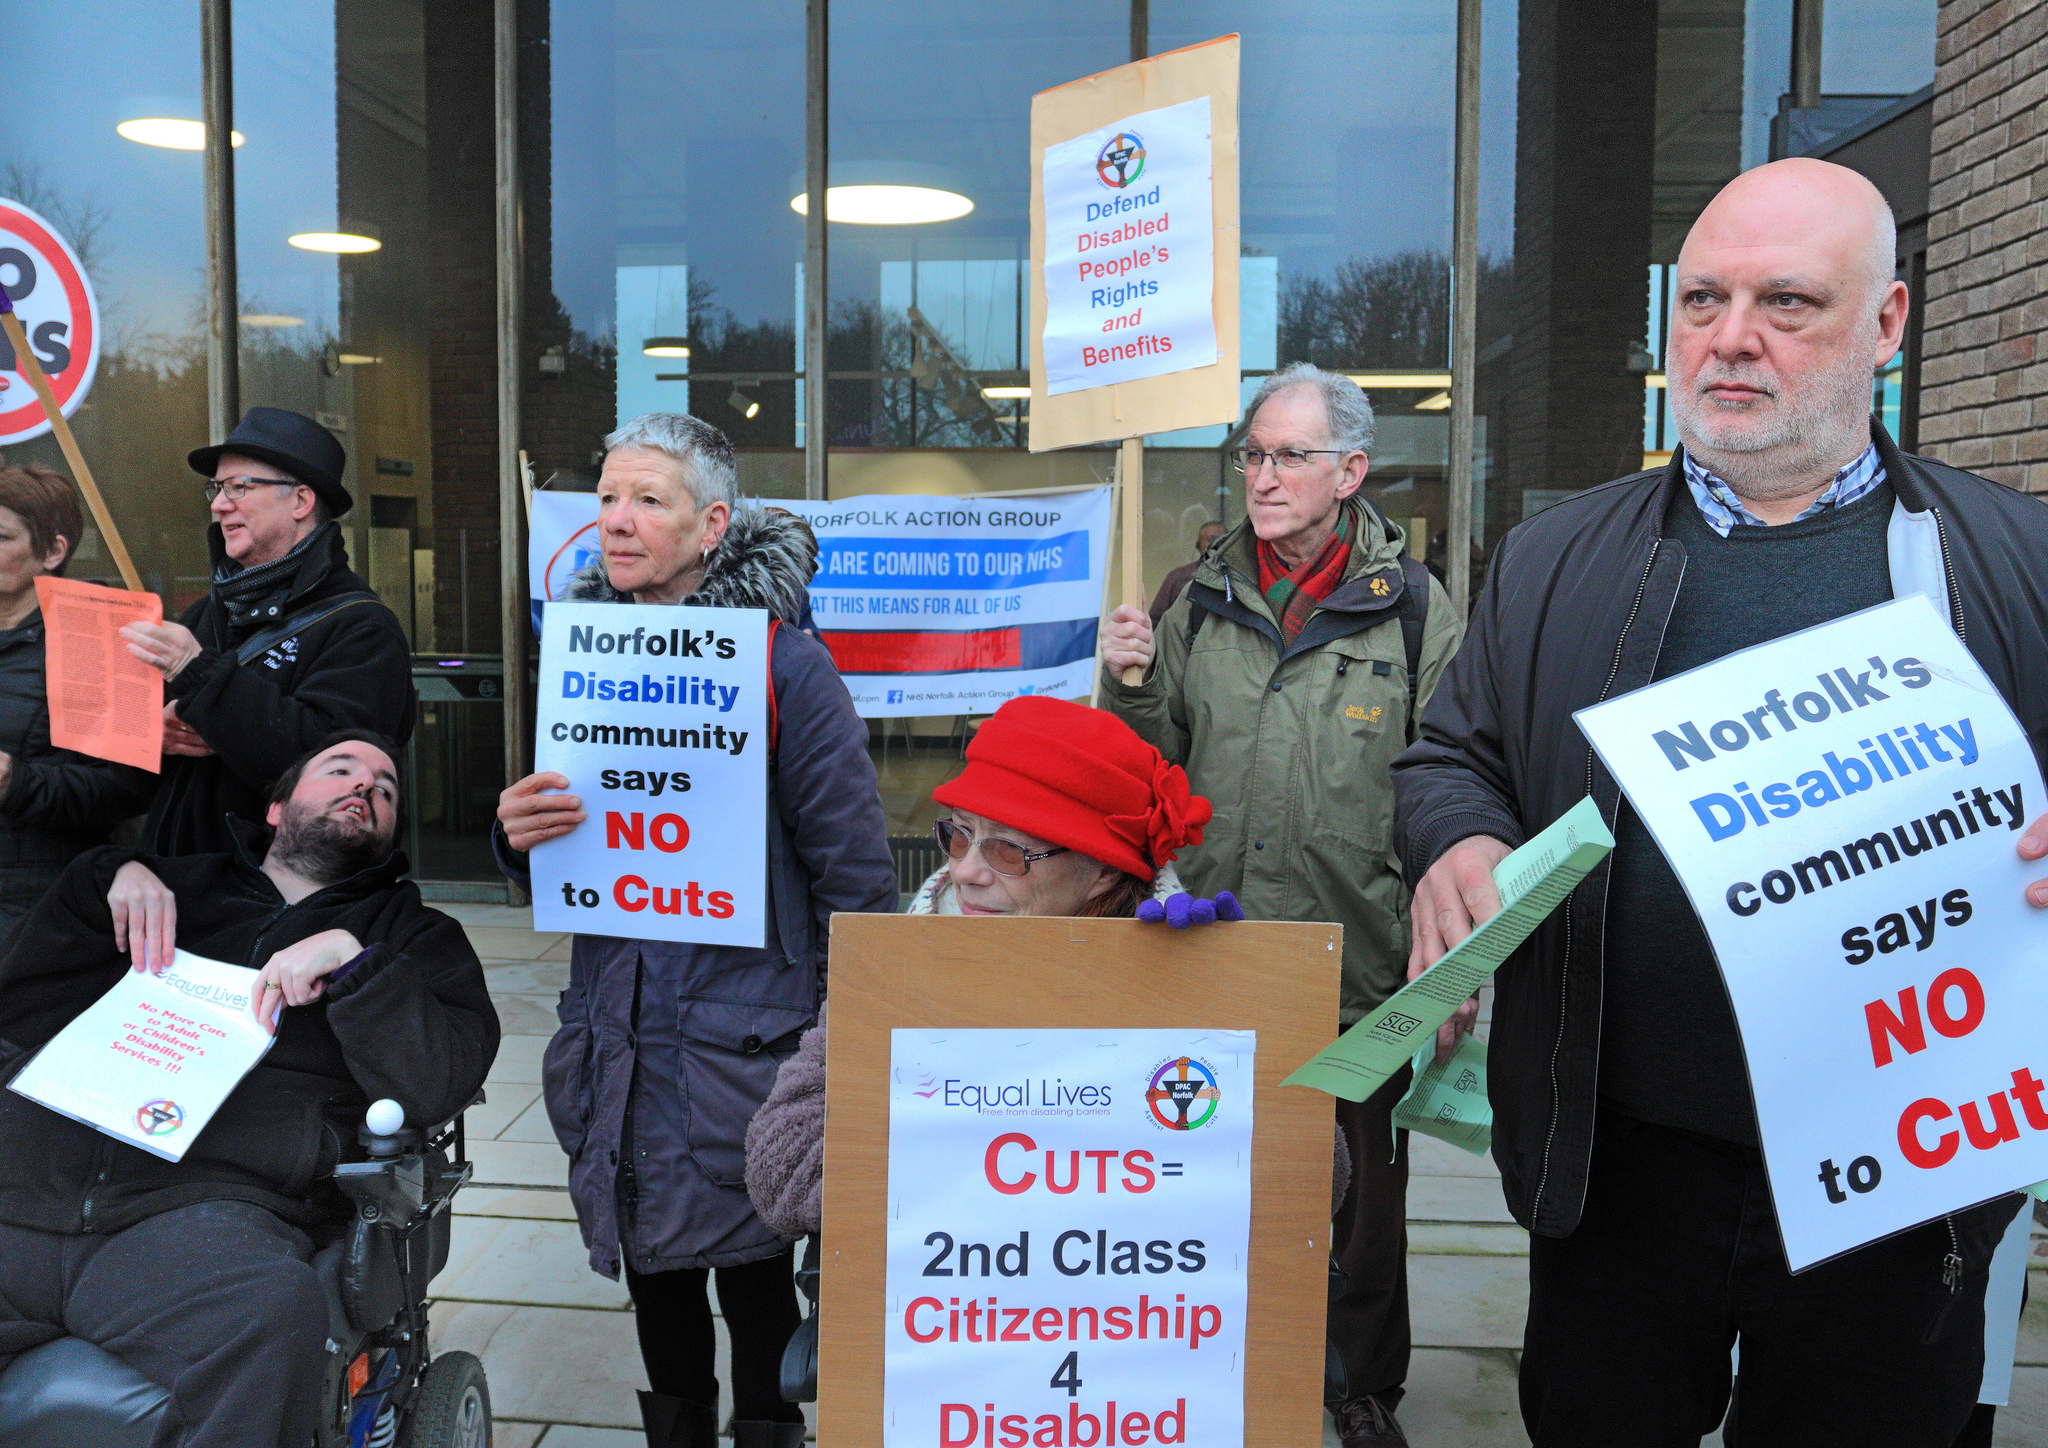 Protest outside County Hall Norwich against cuts to social care. Image credit: Roger Blackwell